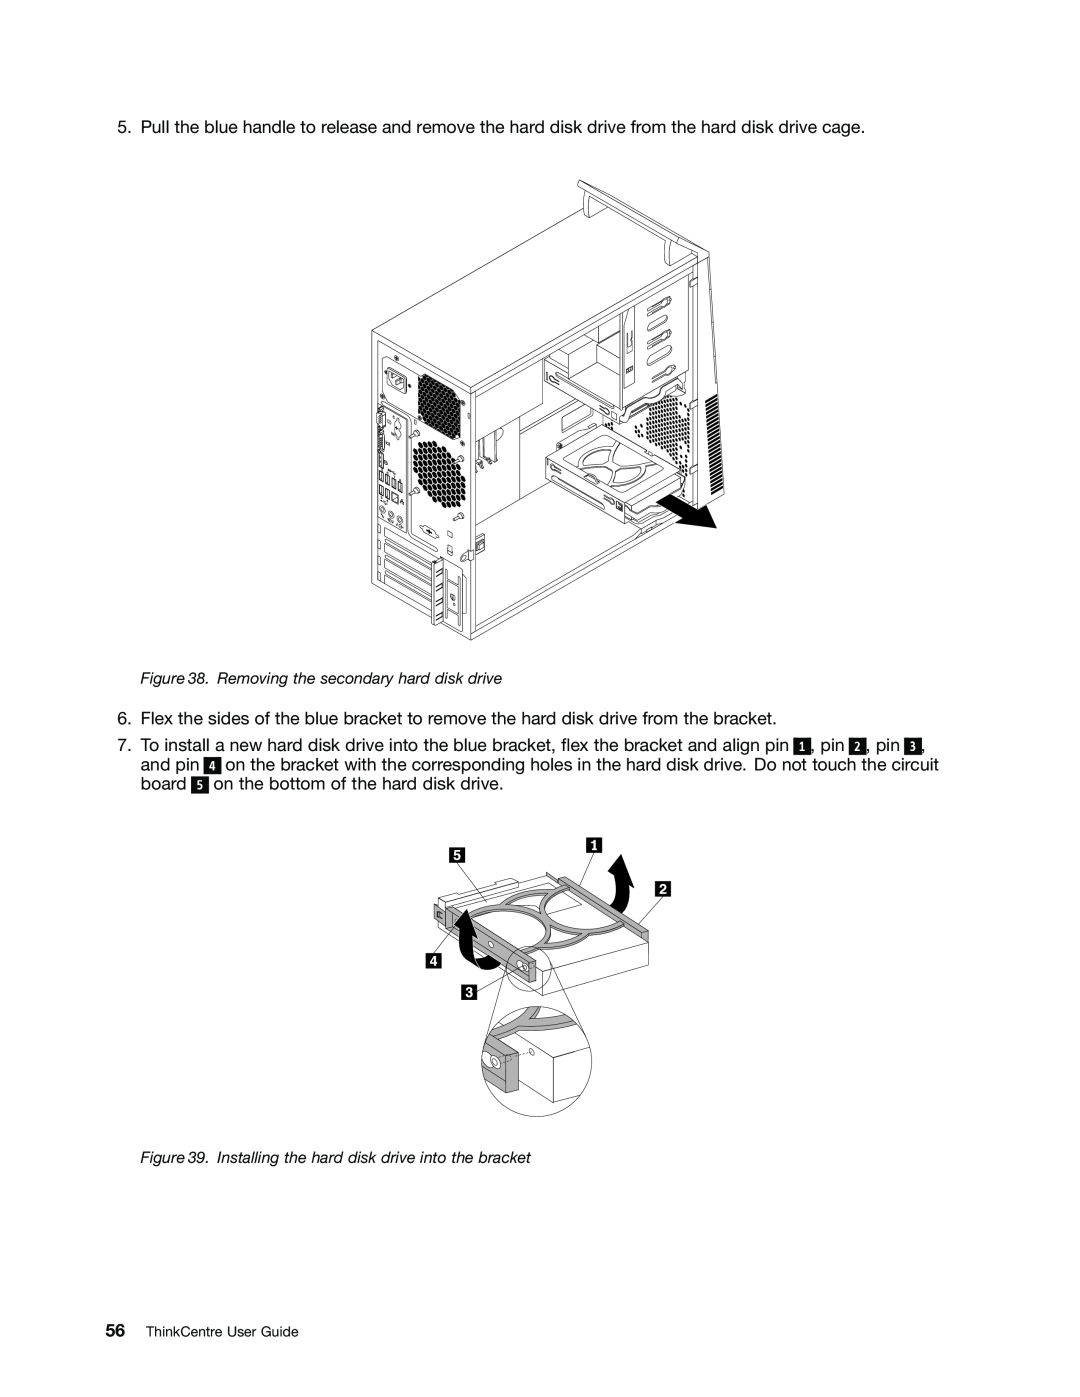 Lenovo 1766, 2112, 2111, 2110, 2011, 1663, 1565, 1662, 1562, 1765 Removing the secondary hard disk drive, 56ThinkCentre User Guide 